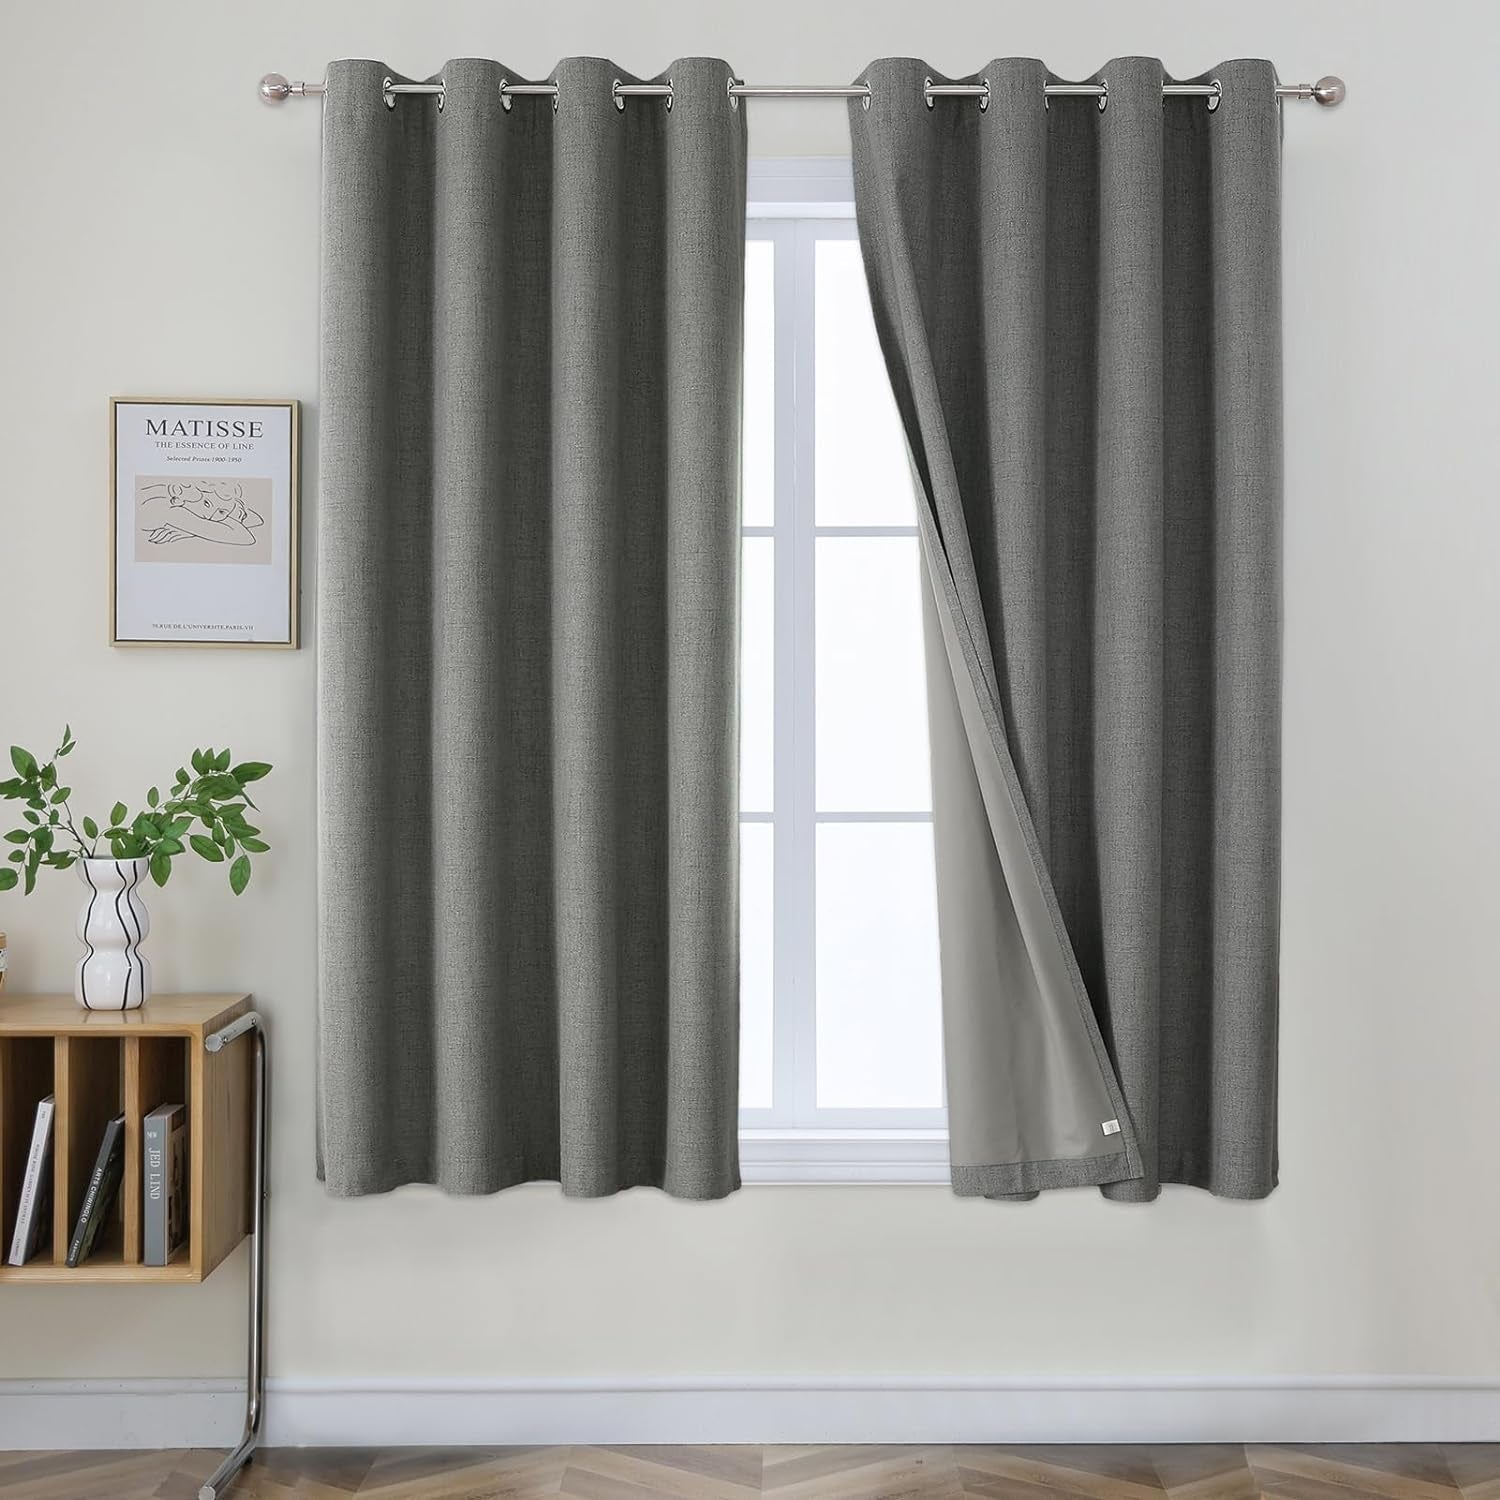 Joydeco Black Out Curtains 63 Inch Long, Curtains 63 Inch Length Textured Thermal Grommets Curtains, Room Darkening Curtains 63 Inches Long for Living Room Bedroom, (42X63 Inch, Greyish White)  Joydeco   